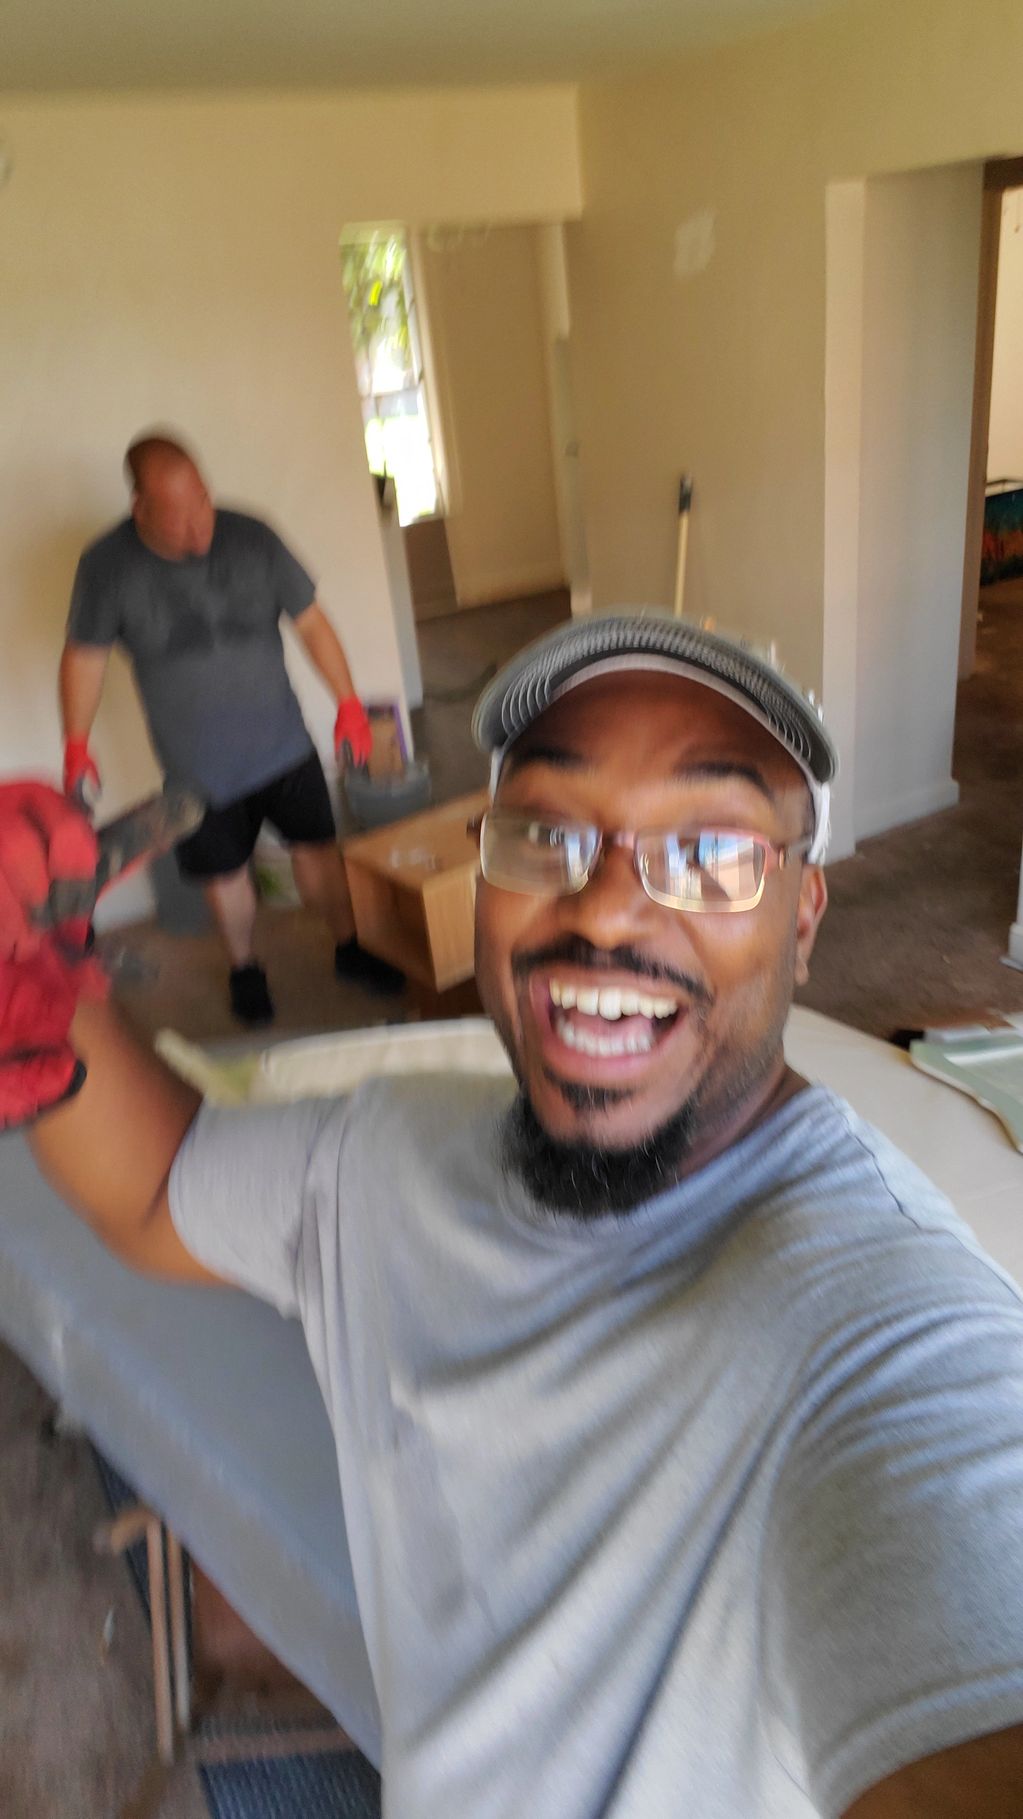 Mike and CP having a blast  at an apartment complex cleanout!